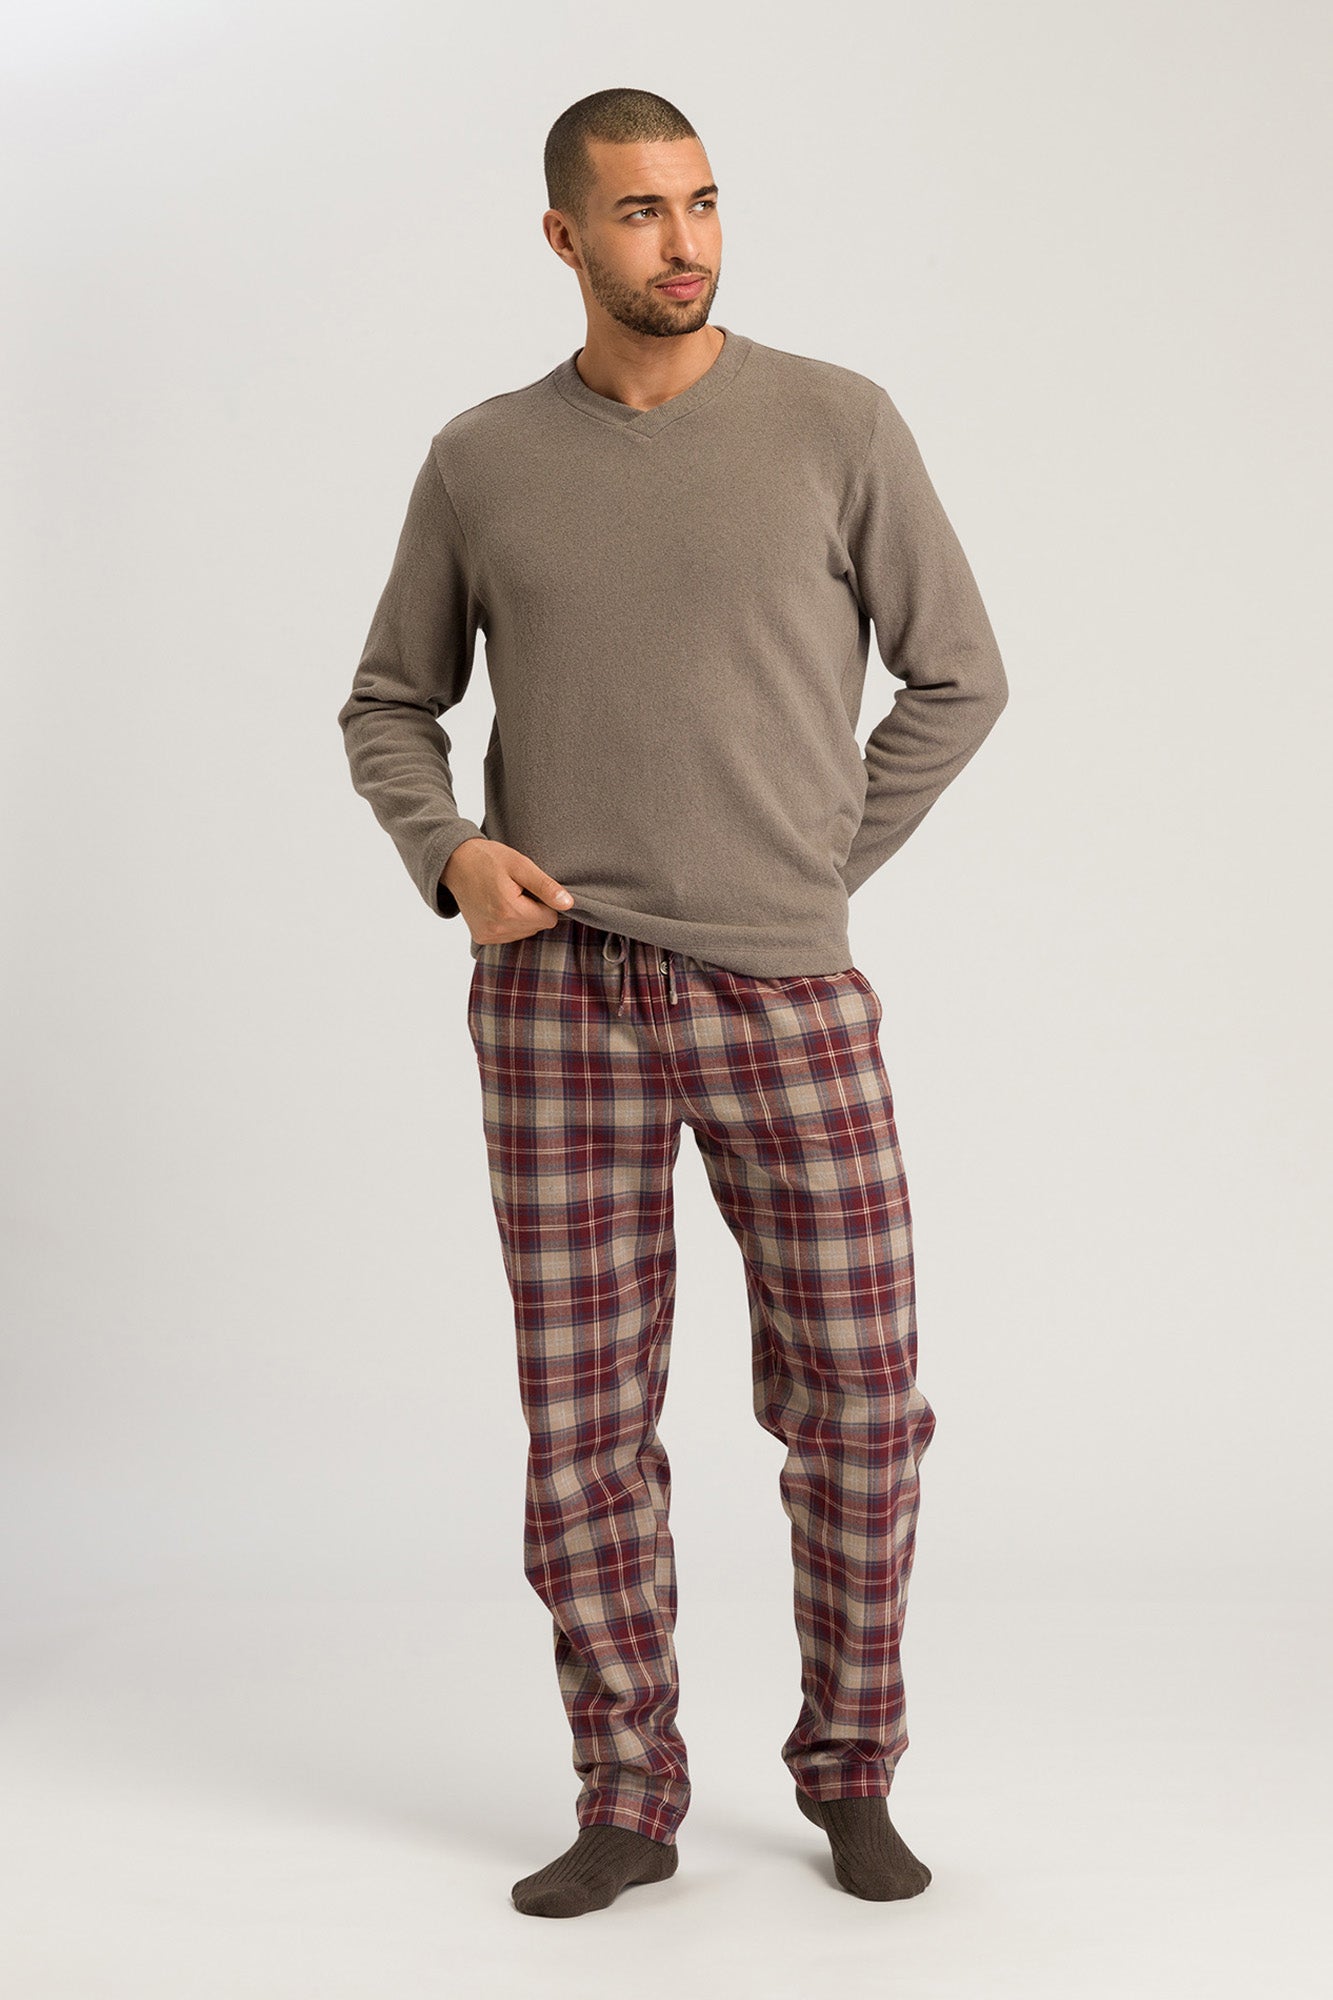 The Cozy Comfort Long Pants By HANRO In Homey Check